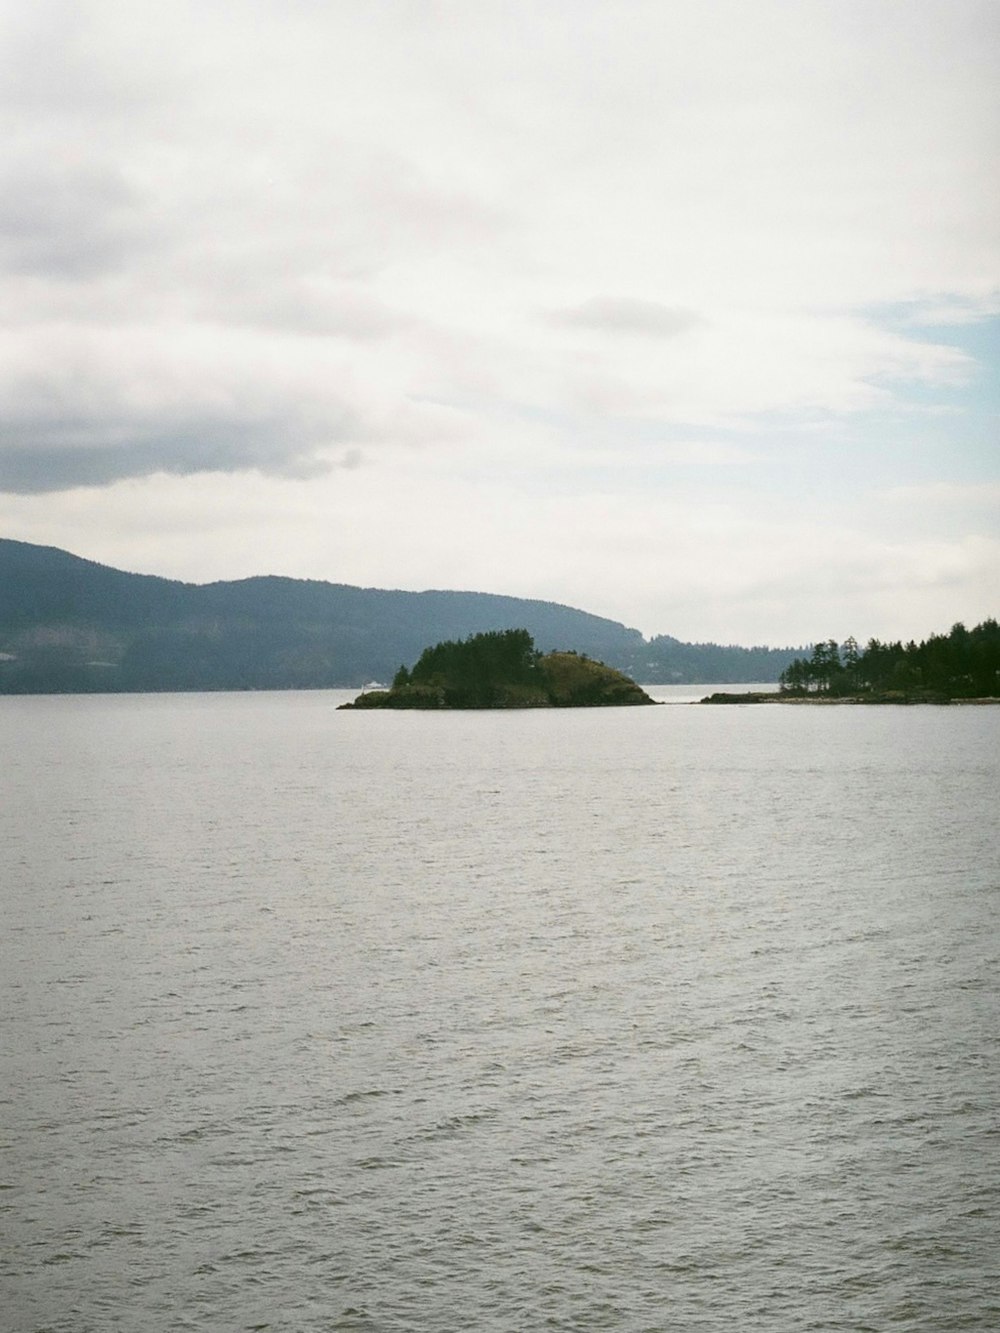 a body of water with trees and hills in the background